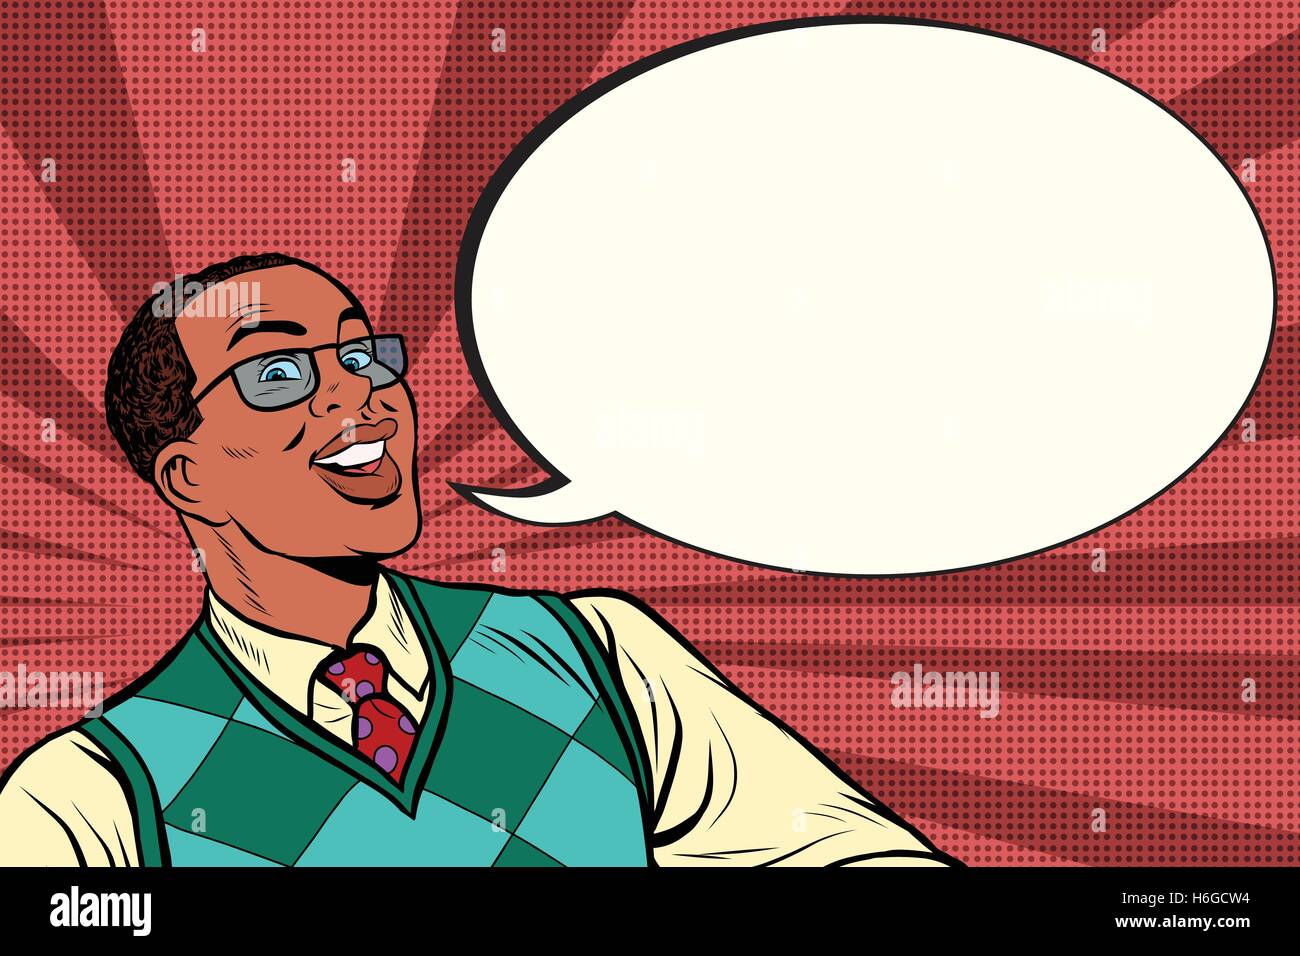 Intelligent African with glasses says comic bubble Stock Vector